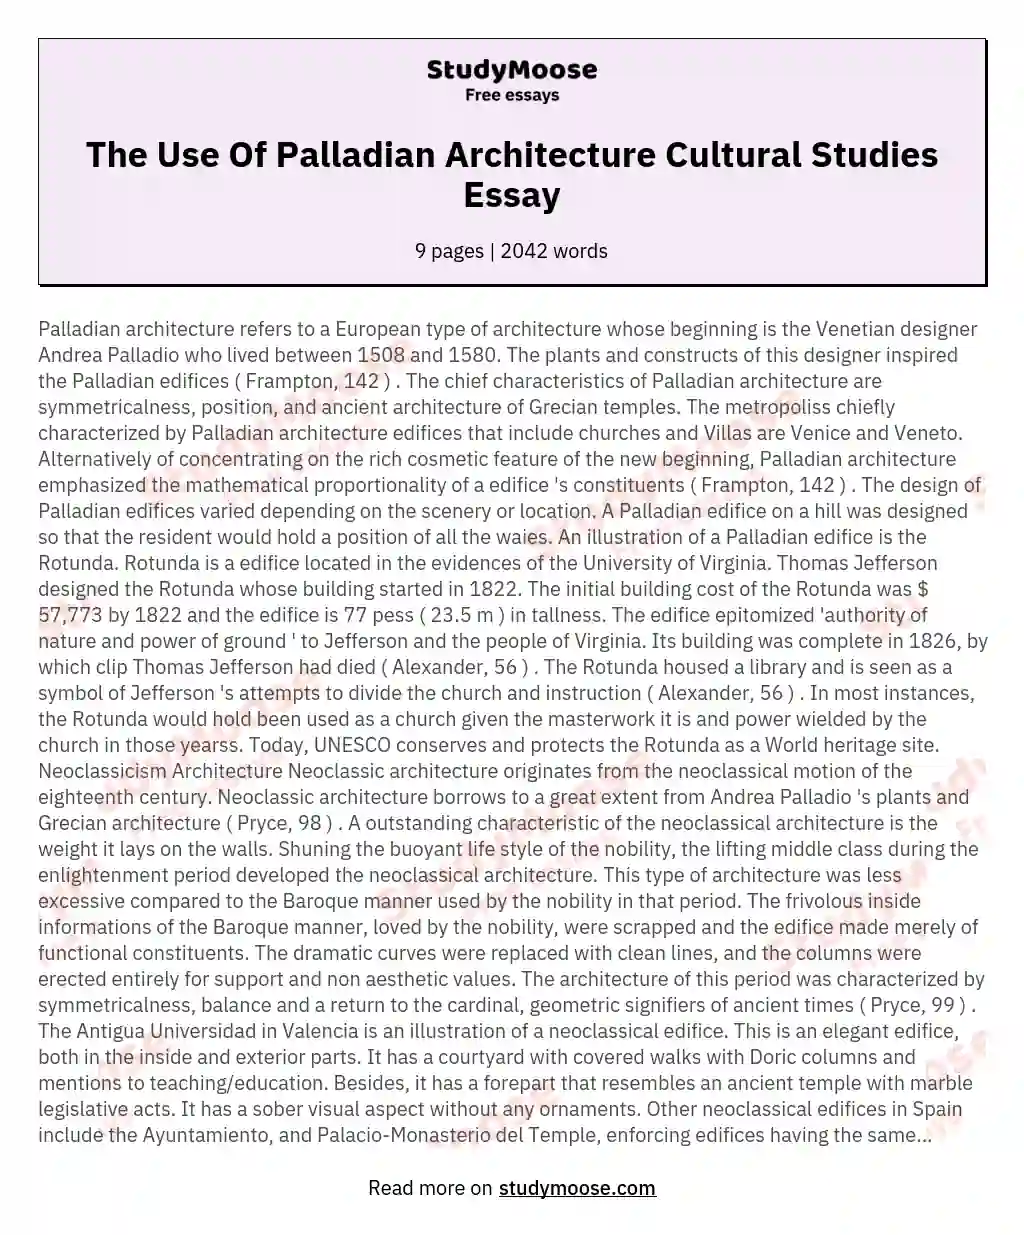 The Use Of Palladian Architecture Cultural Studies Essay essay